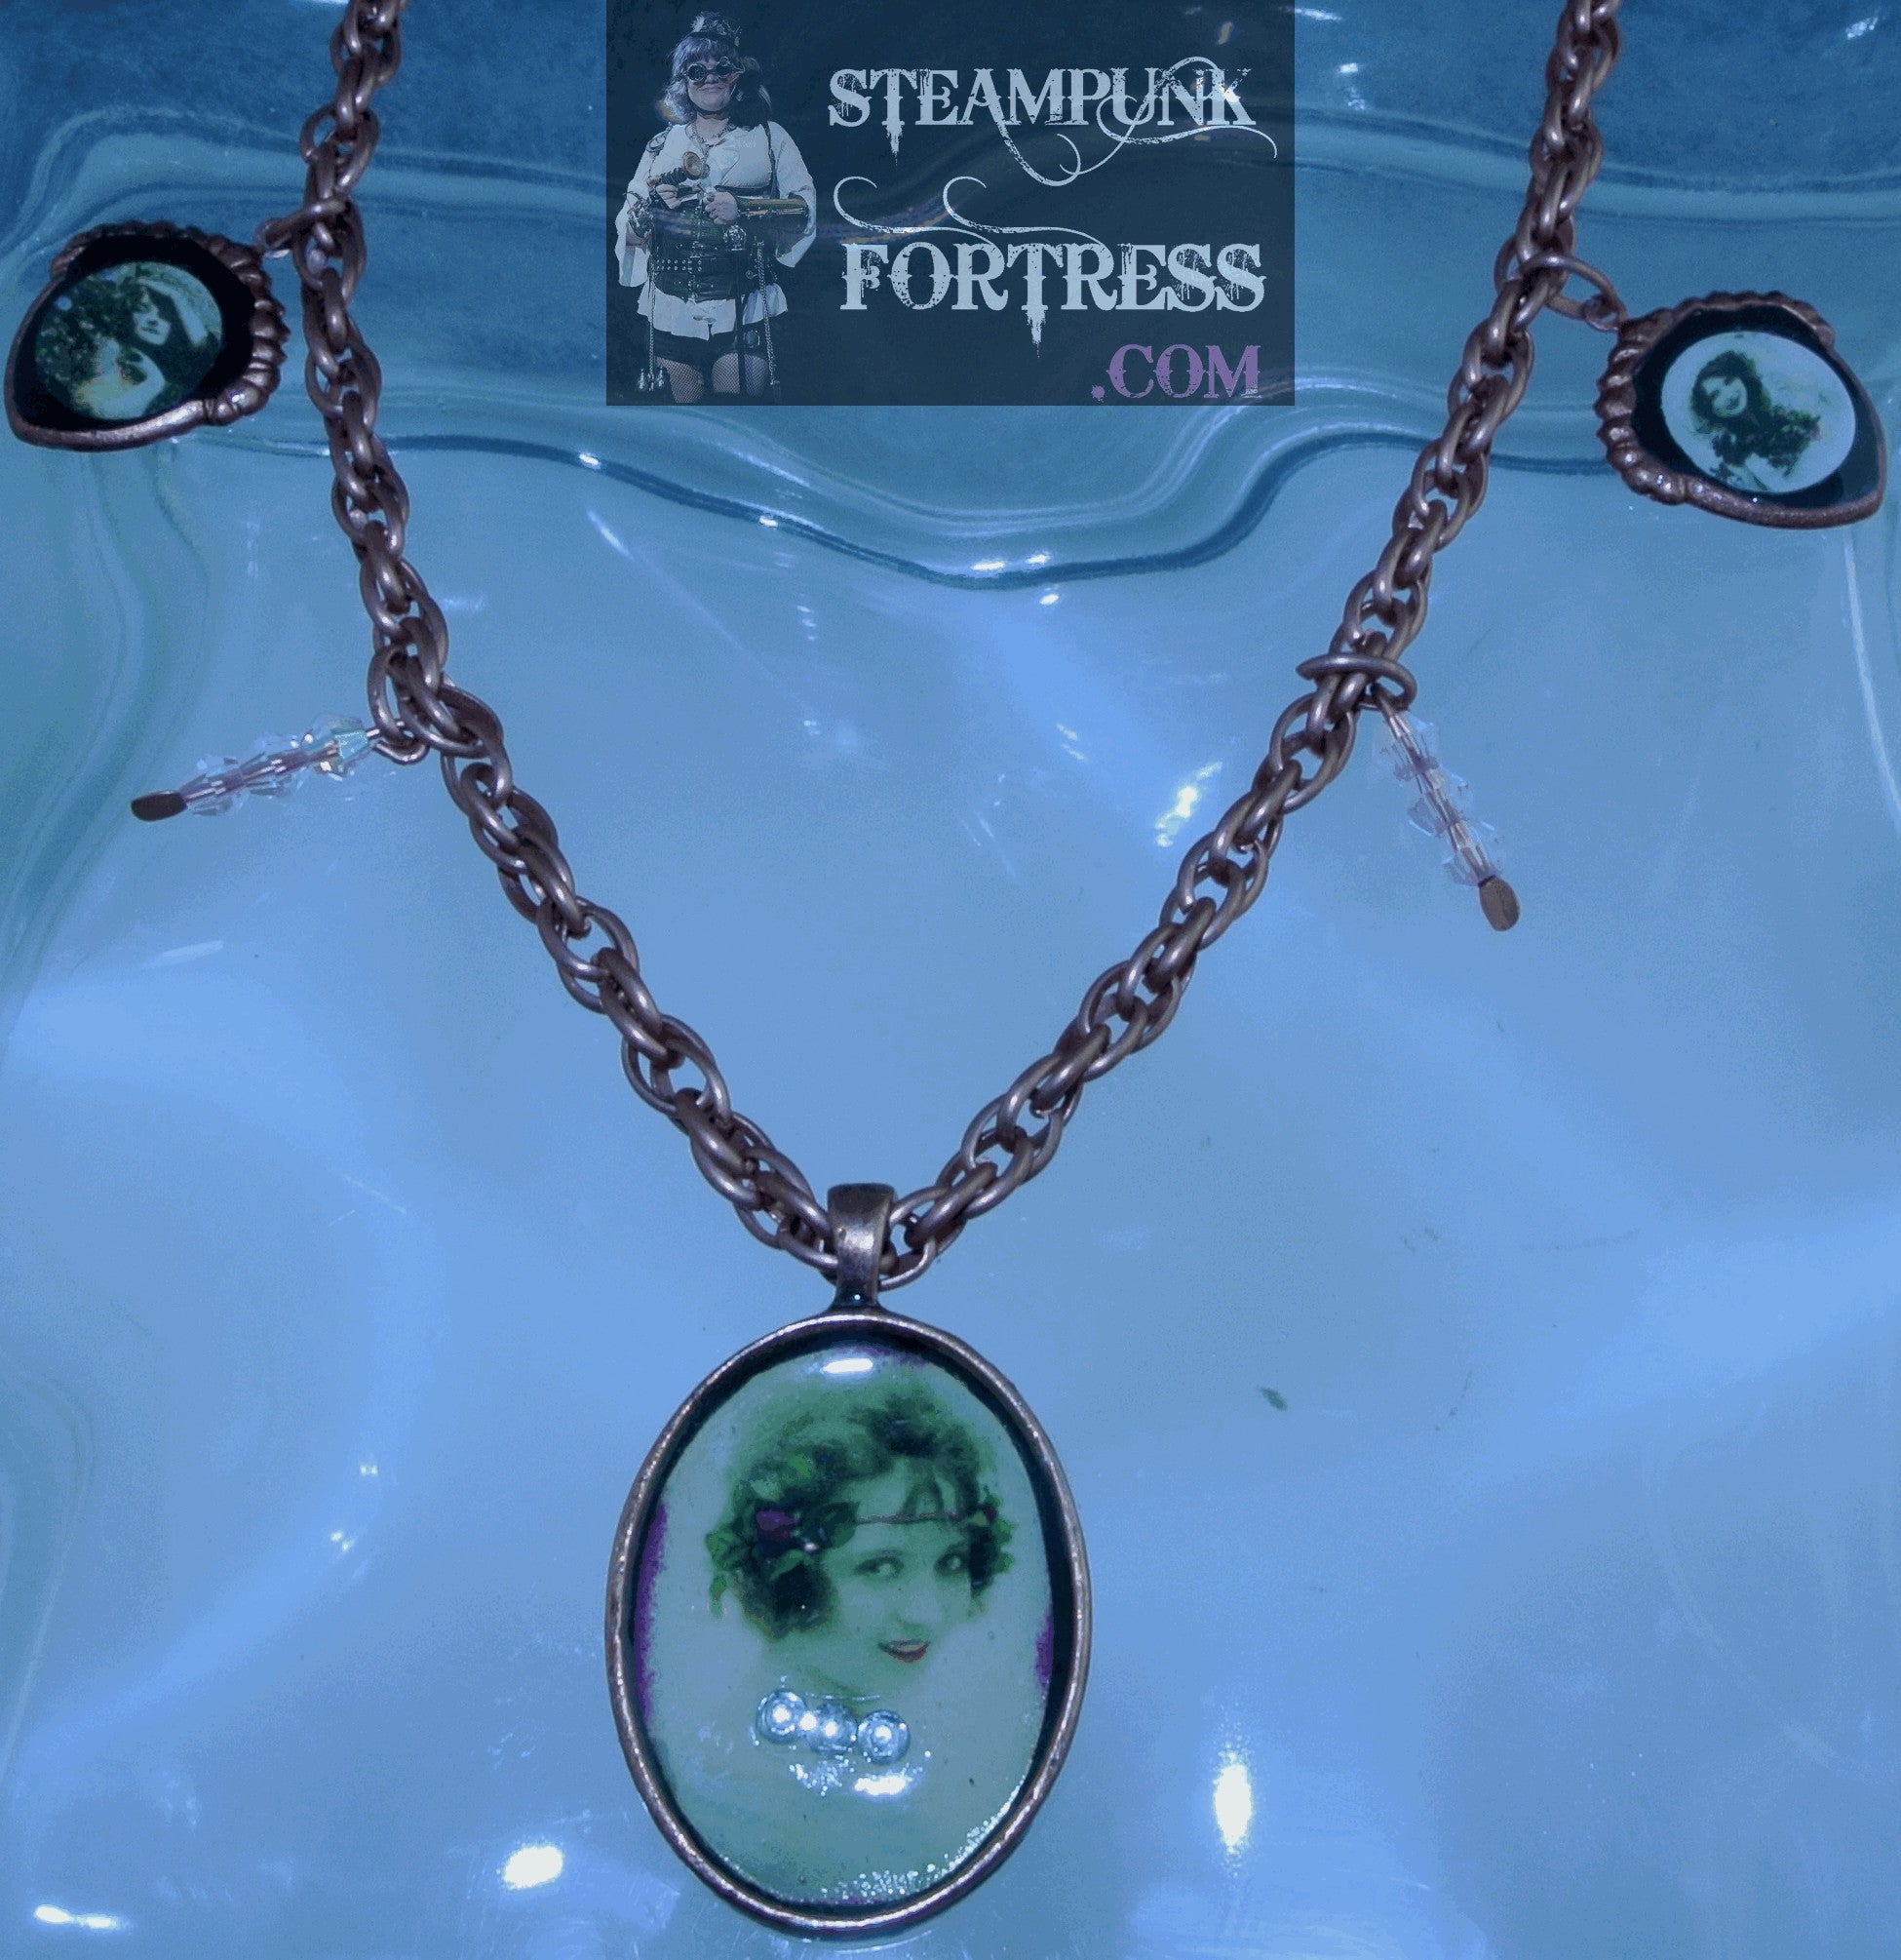 COPPER BRIGHT VINTAGE LADIES FLAPPER GIRL 2 SHIELDS LILAC SNOWGIRL WILDFLOWER SWAROVKSI  CRYSTALS NECKLACE SET AVAILABLE STARR WILDE STEAMPUNK FORTRESS